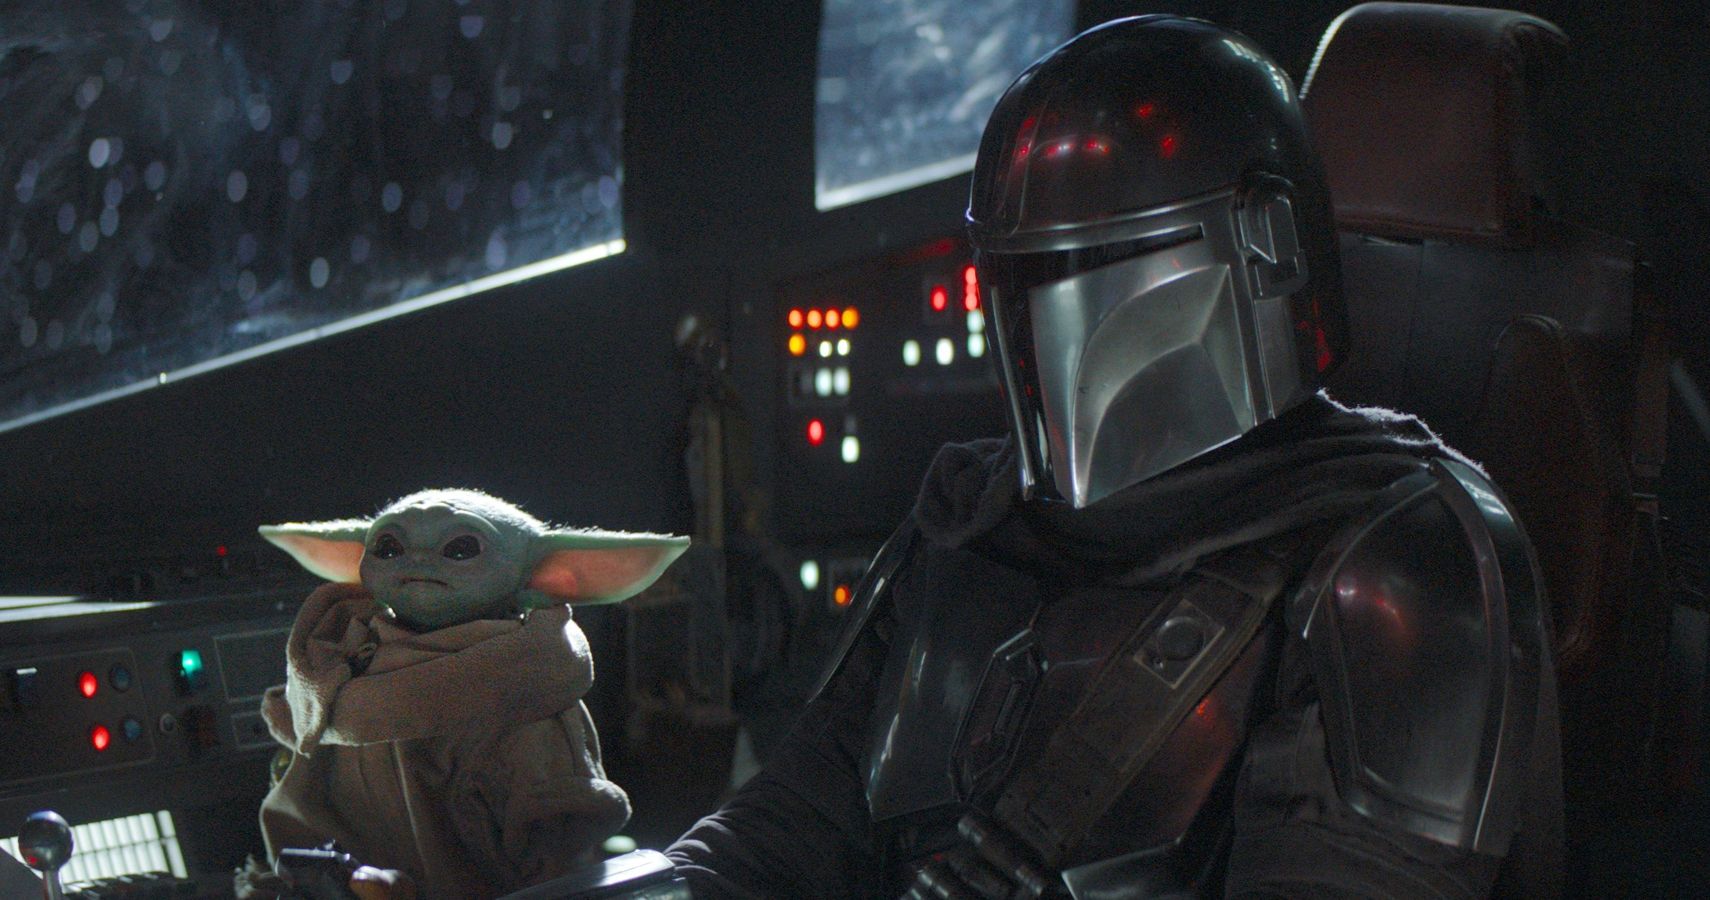 Adorable Moments of The Child in The Mandalorian